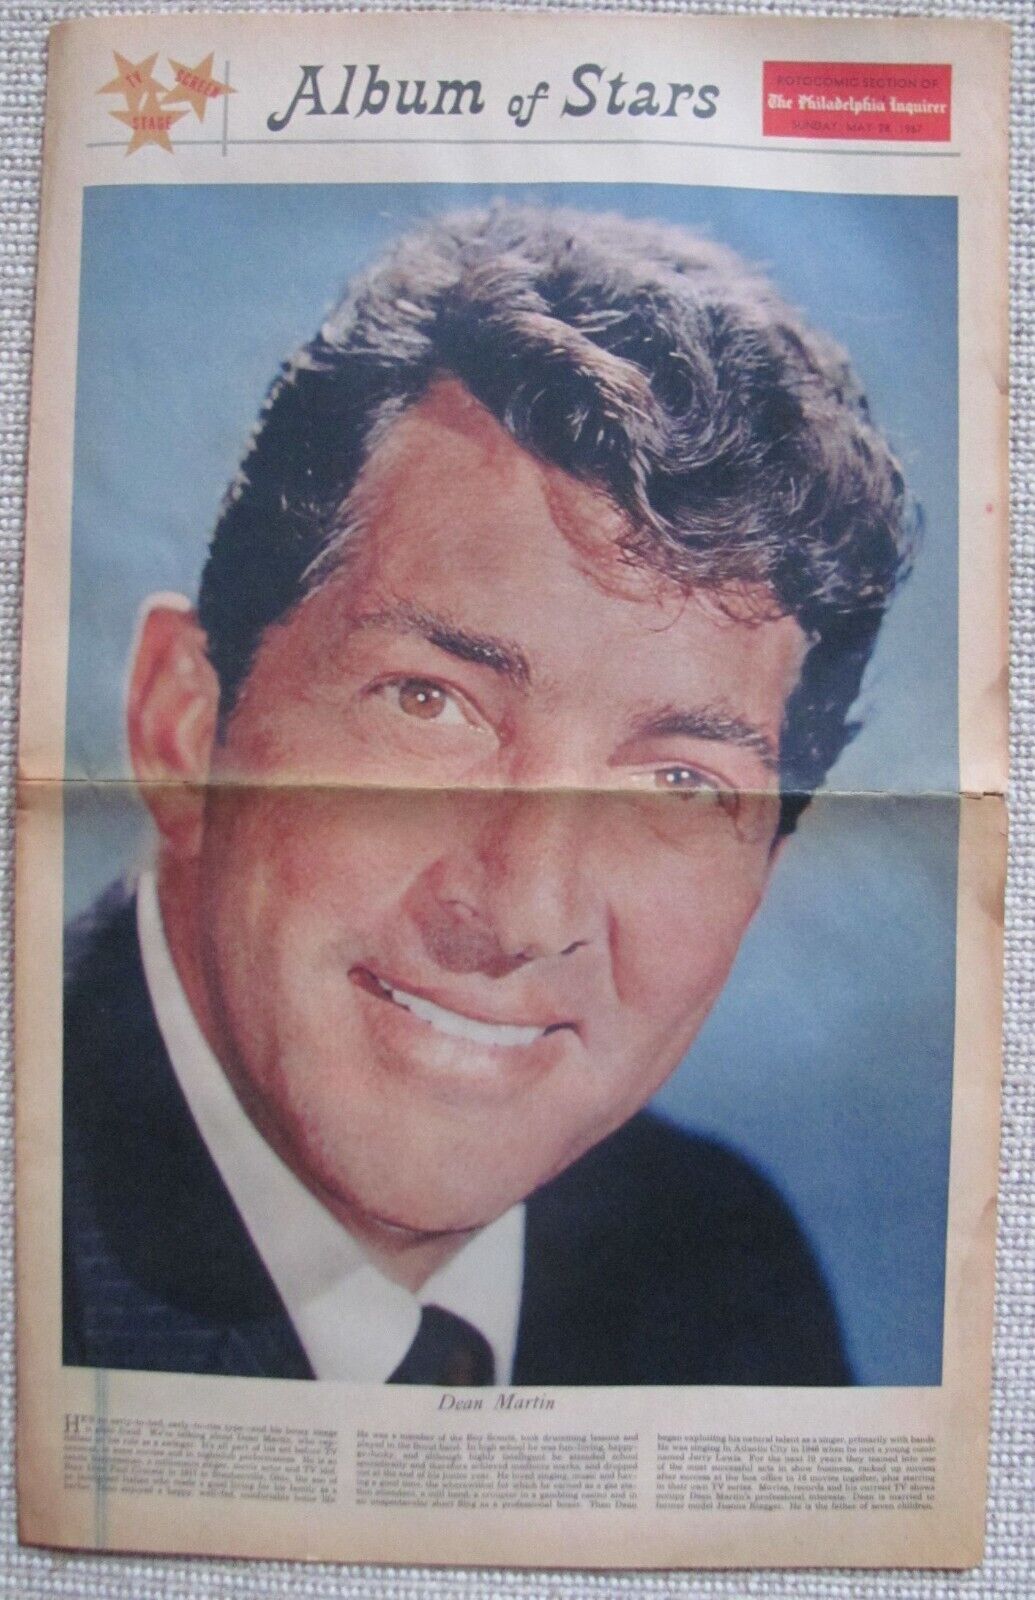 Philadelphia Inquirer Rotocomic Section May 28, 1967 Dean Martin